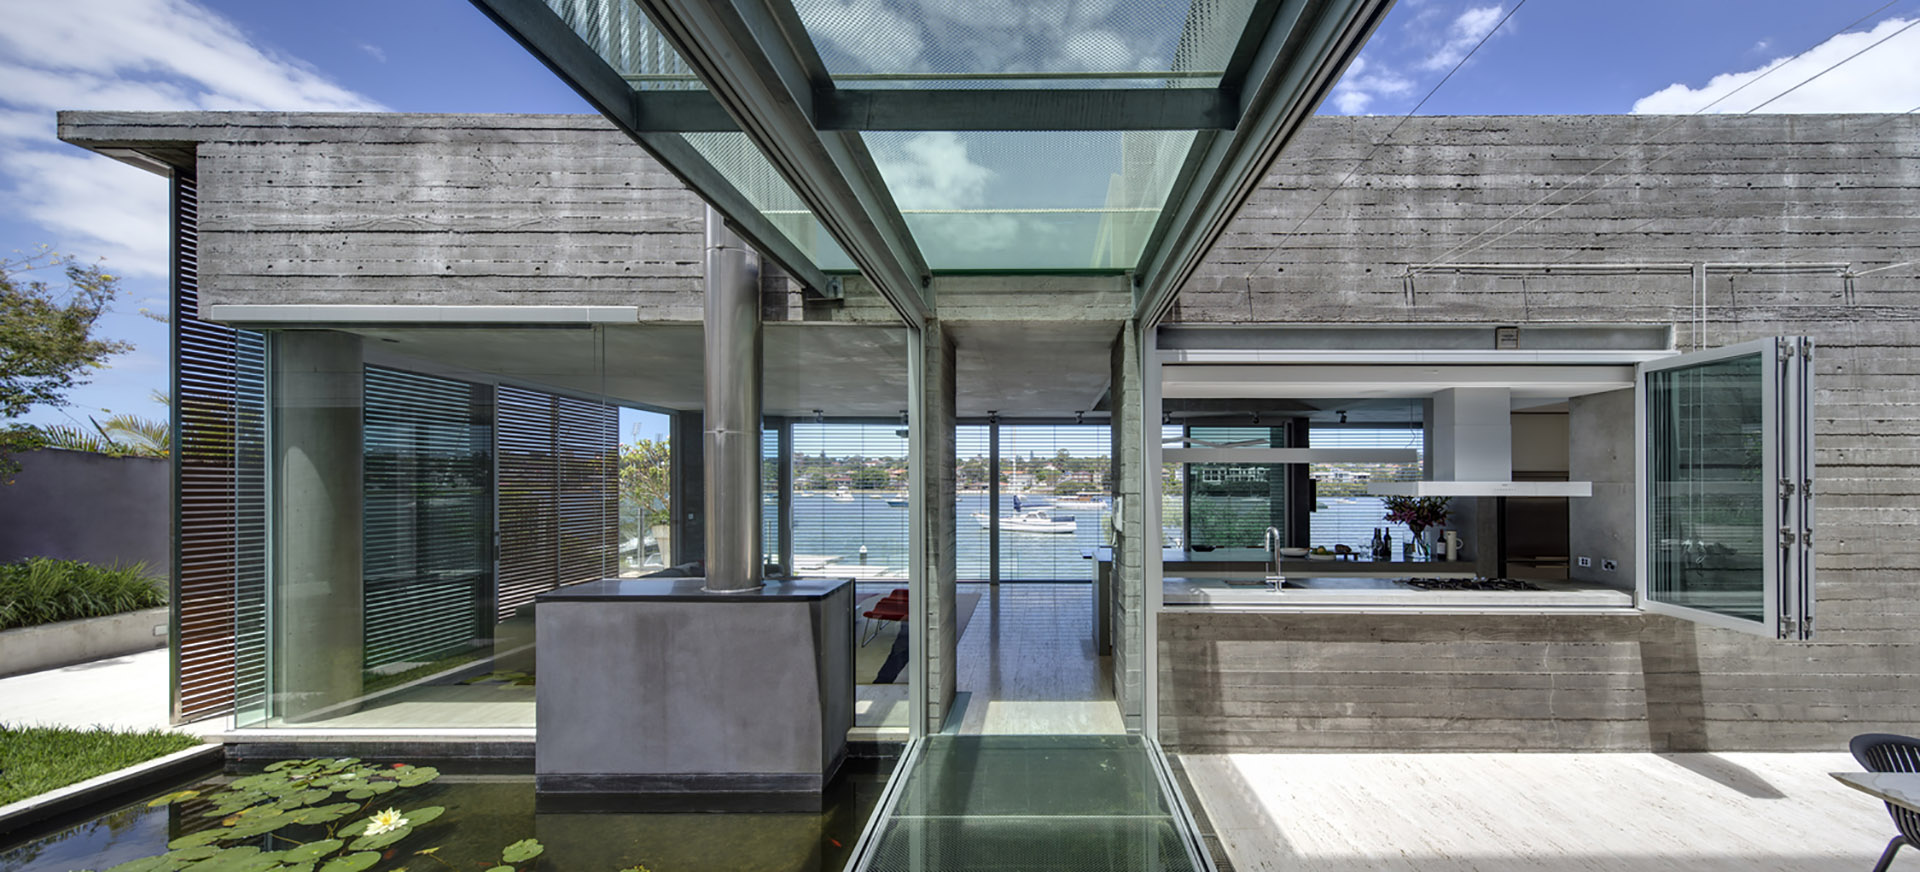 Villa in Sidney, walkway that combines living and sleeping areas